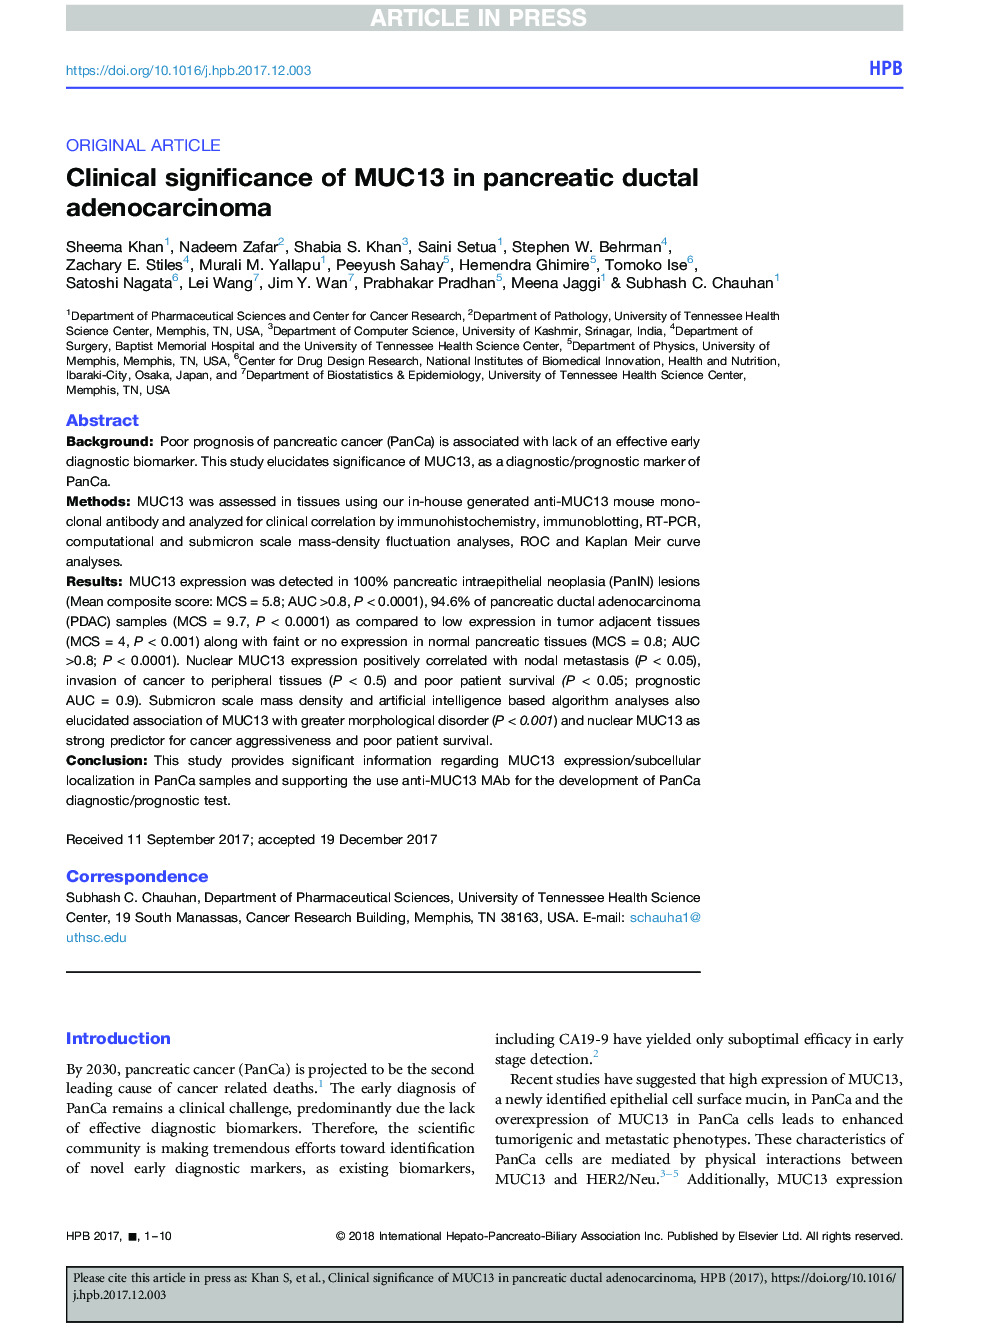 Clinical significance of MUC13 in pancreatic ductal adenocarcinoma